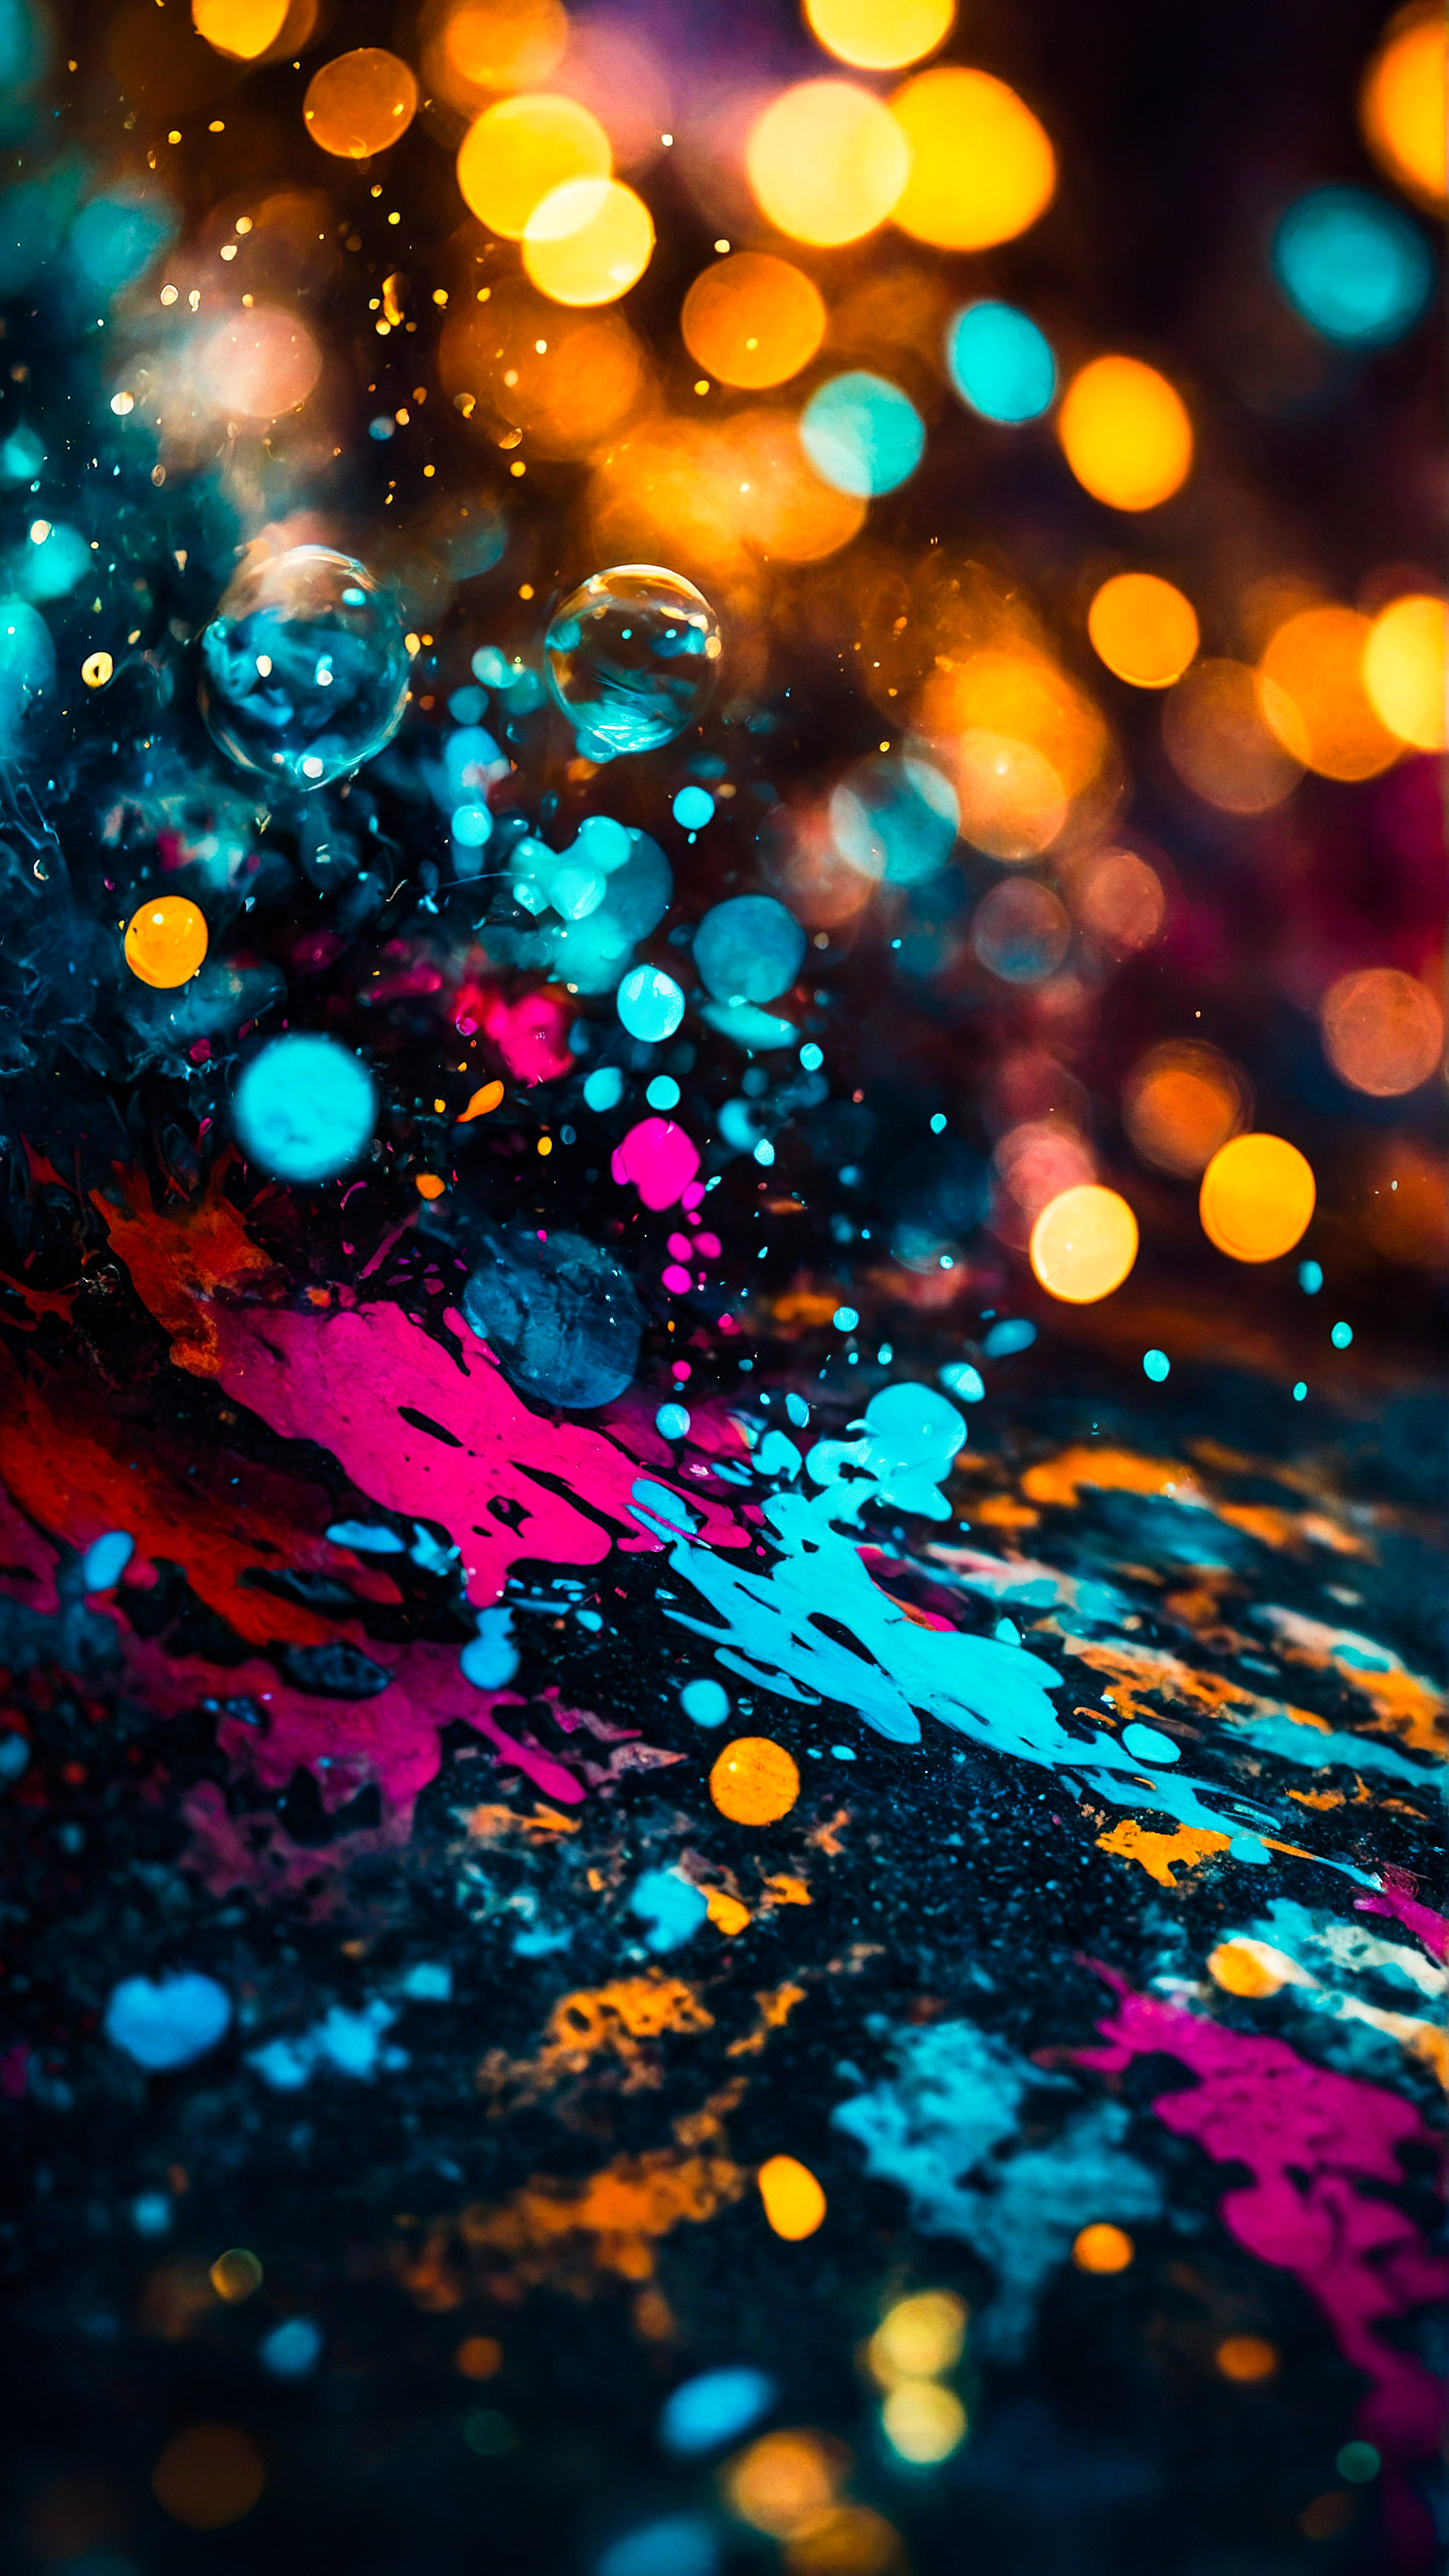 Discover the vibrancy of street art with our cool iPhone background, full of vibrant colors and abstract shapes.